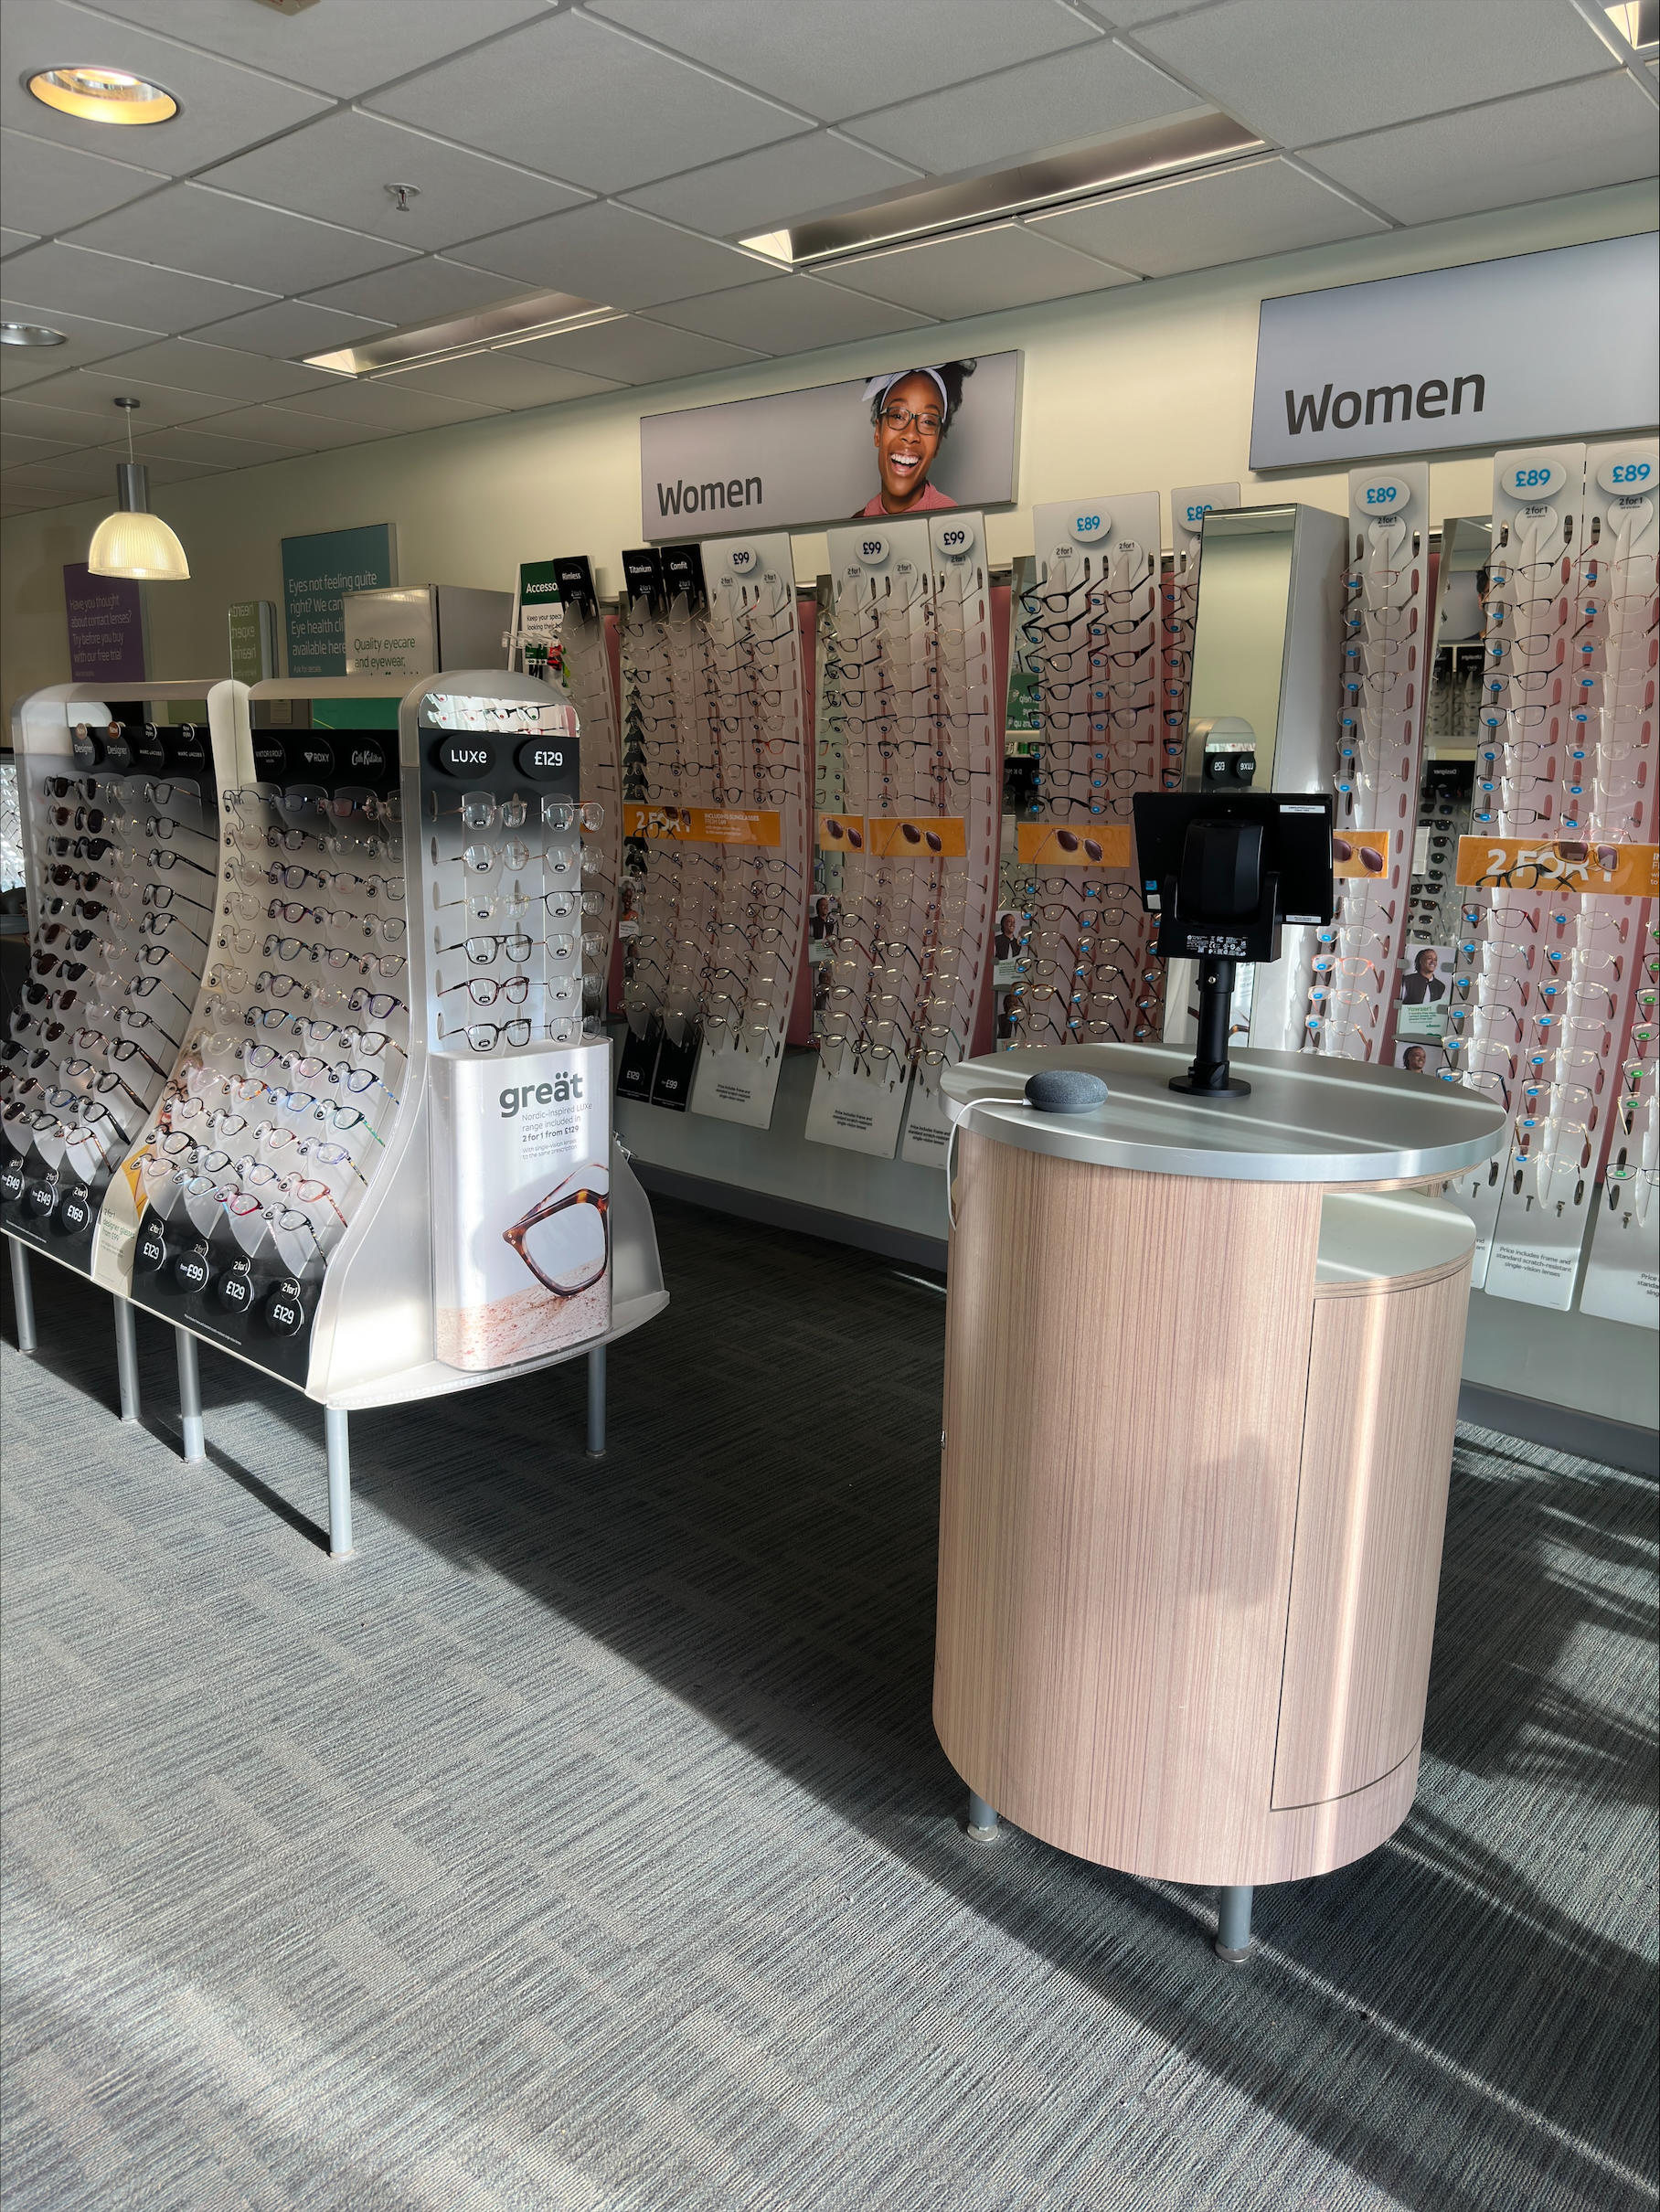 Specsavers Belle Vale Specsavers Opticians and Audiologists - Belle Vale Liverpool 01514 881600